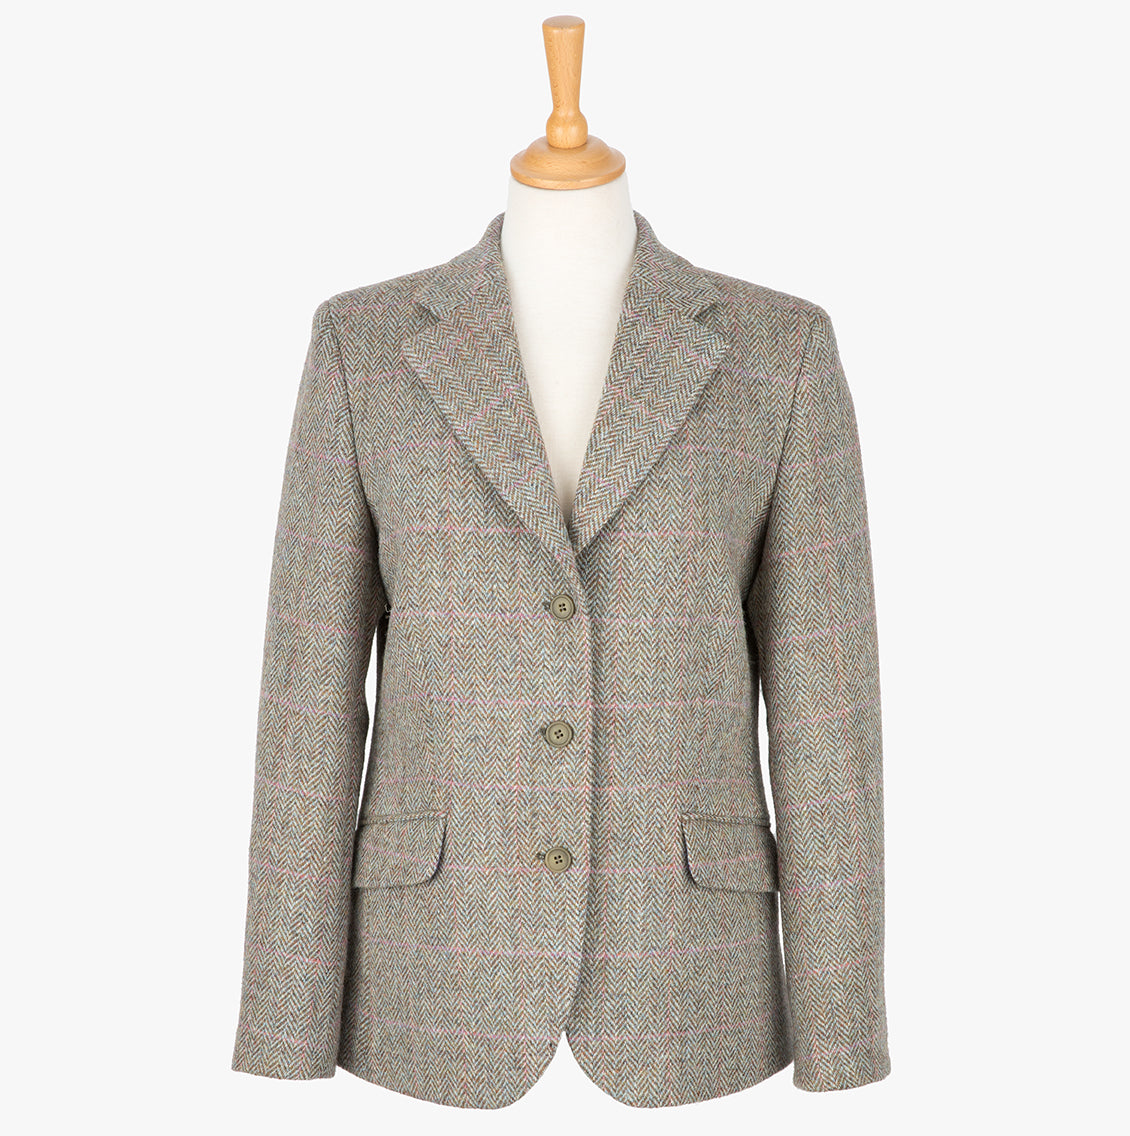 Harris Tweed ladies jacket in pastel check, the colour is a cream and brown small herringbone with a pink and blue overcheck. It has three buttons and two pockets.